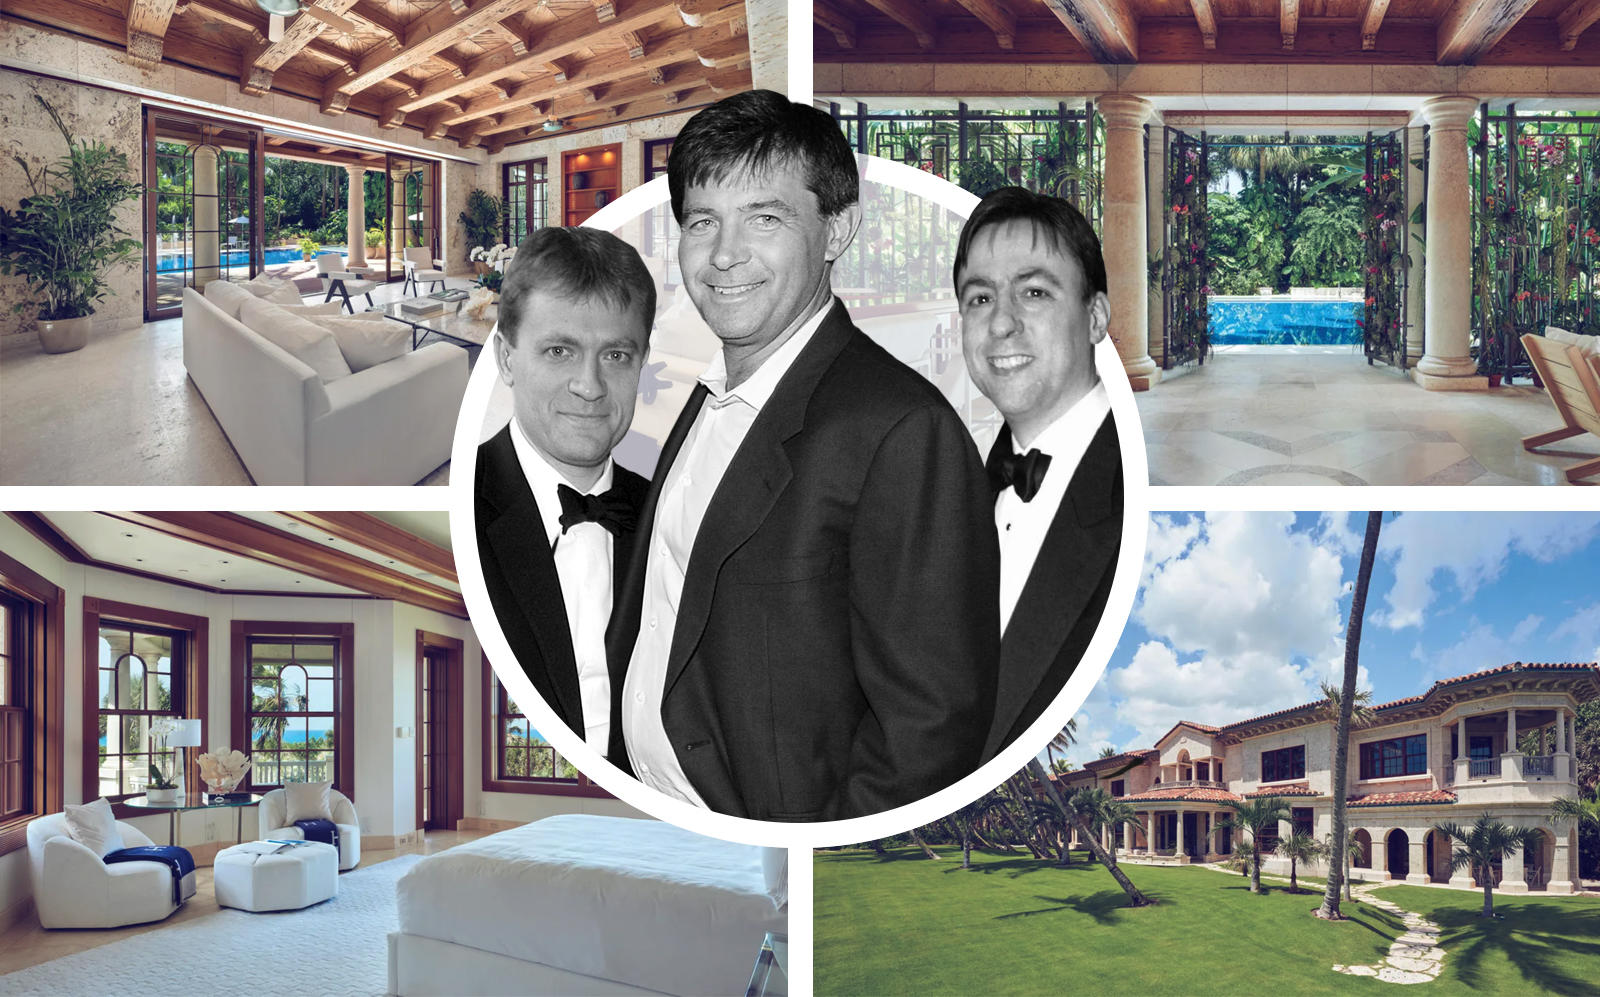 Daniel, Dirk and Robert Ziff with their recently sold Manalapan compound. (Sotheby's International Realty, Getty)